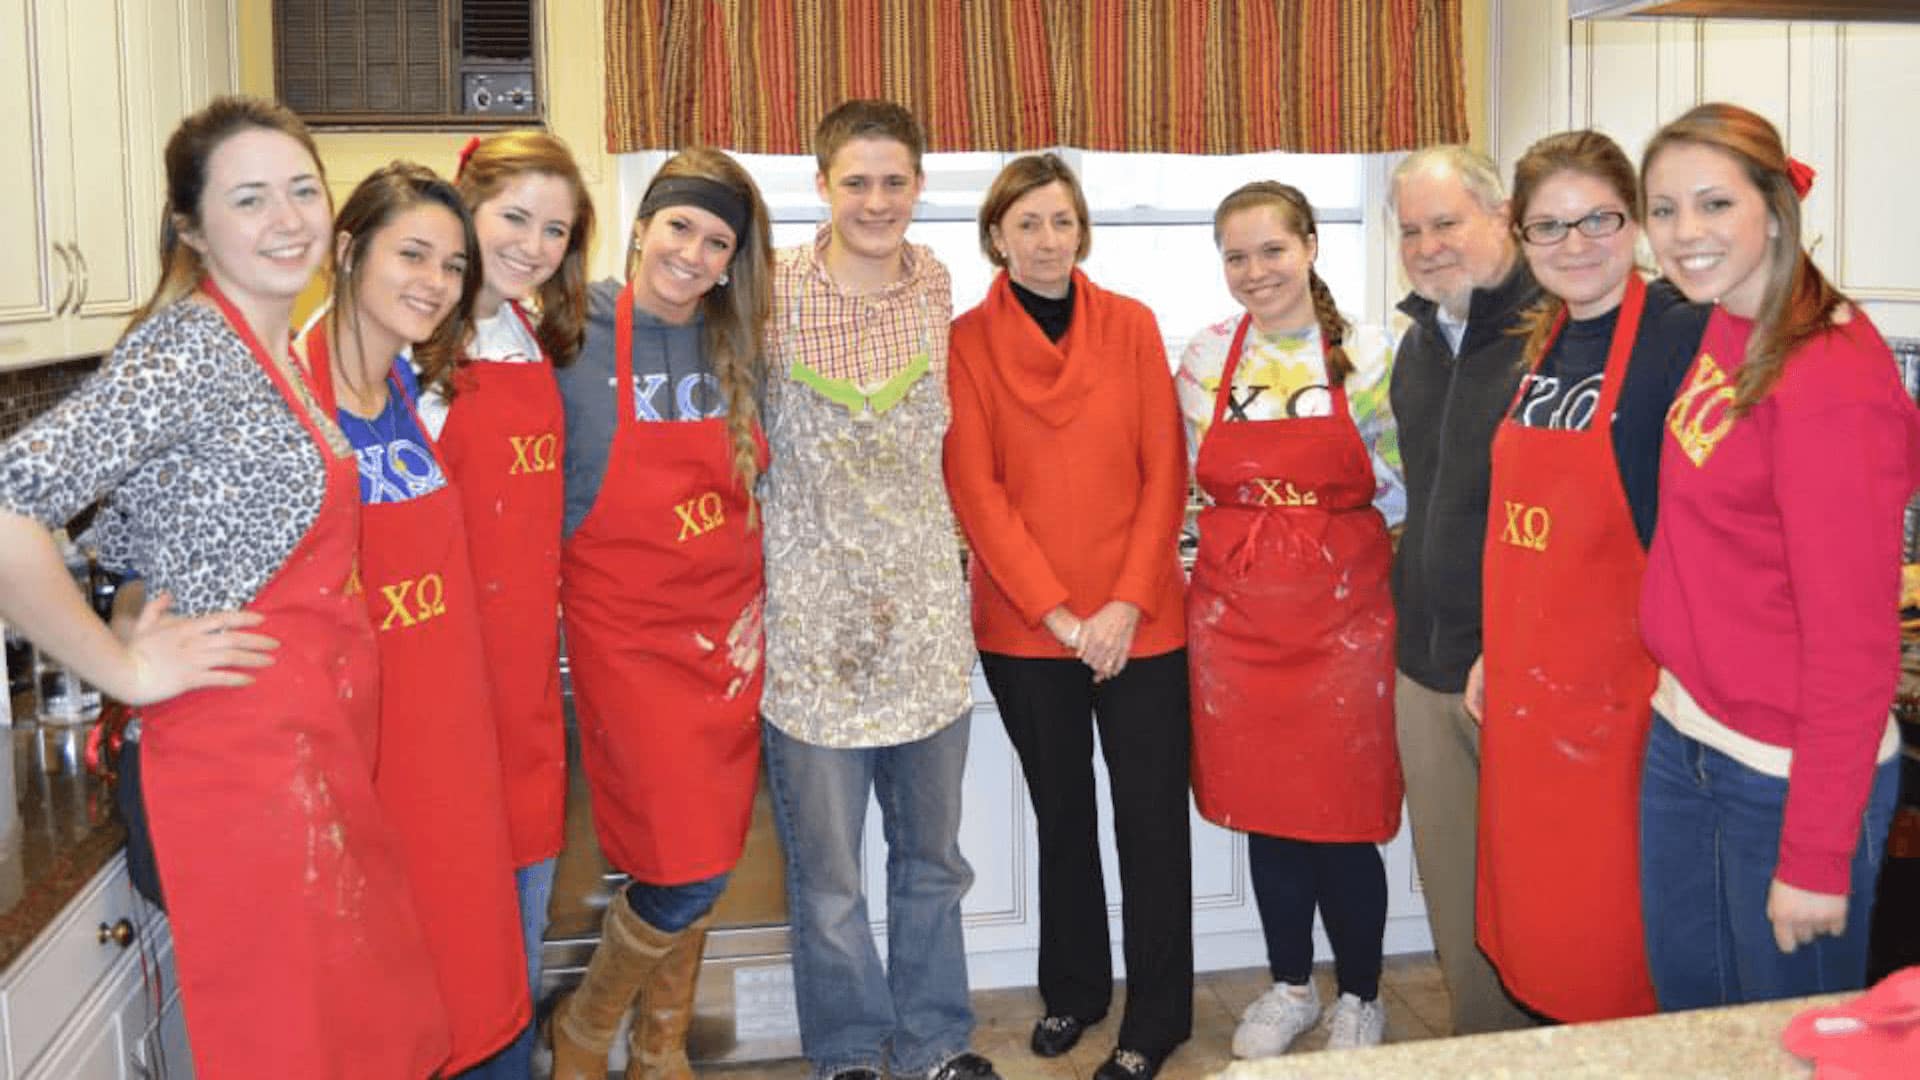 Chi Omega group photo in baking aprons with Dr. and Mrs. Arnn.